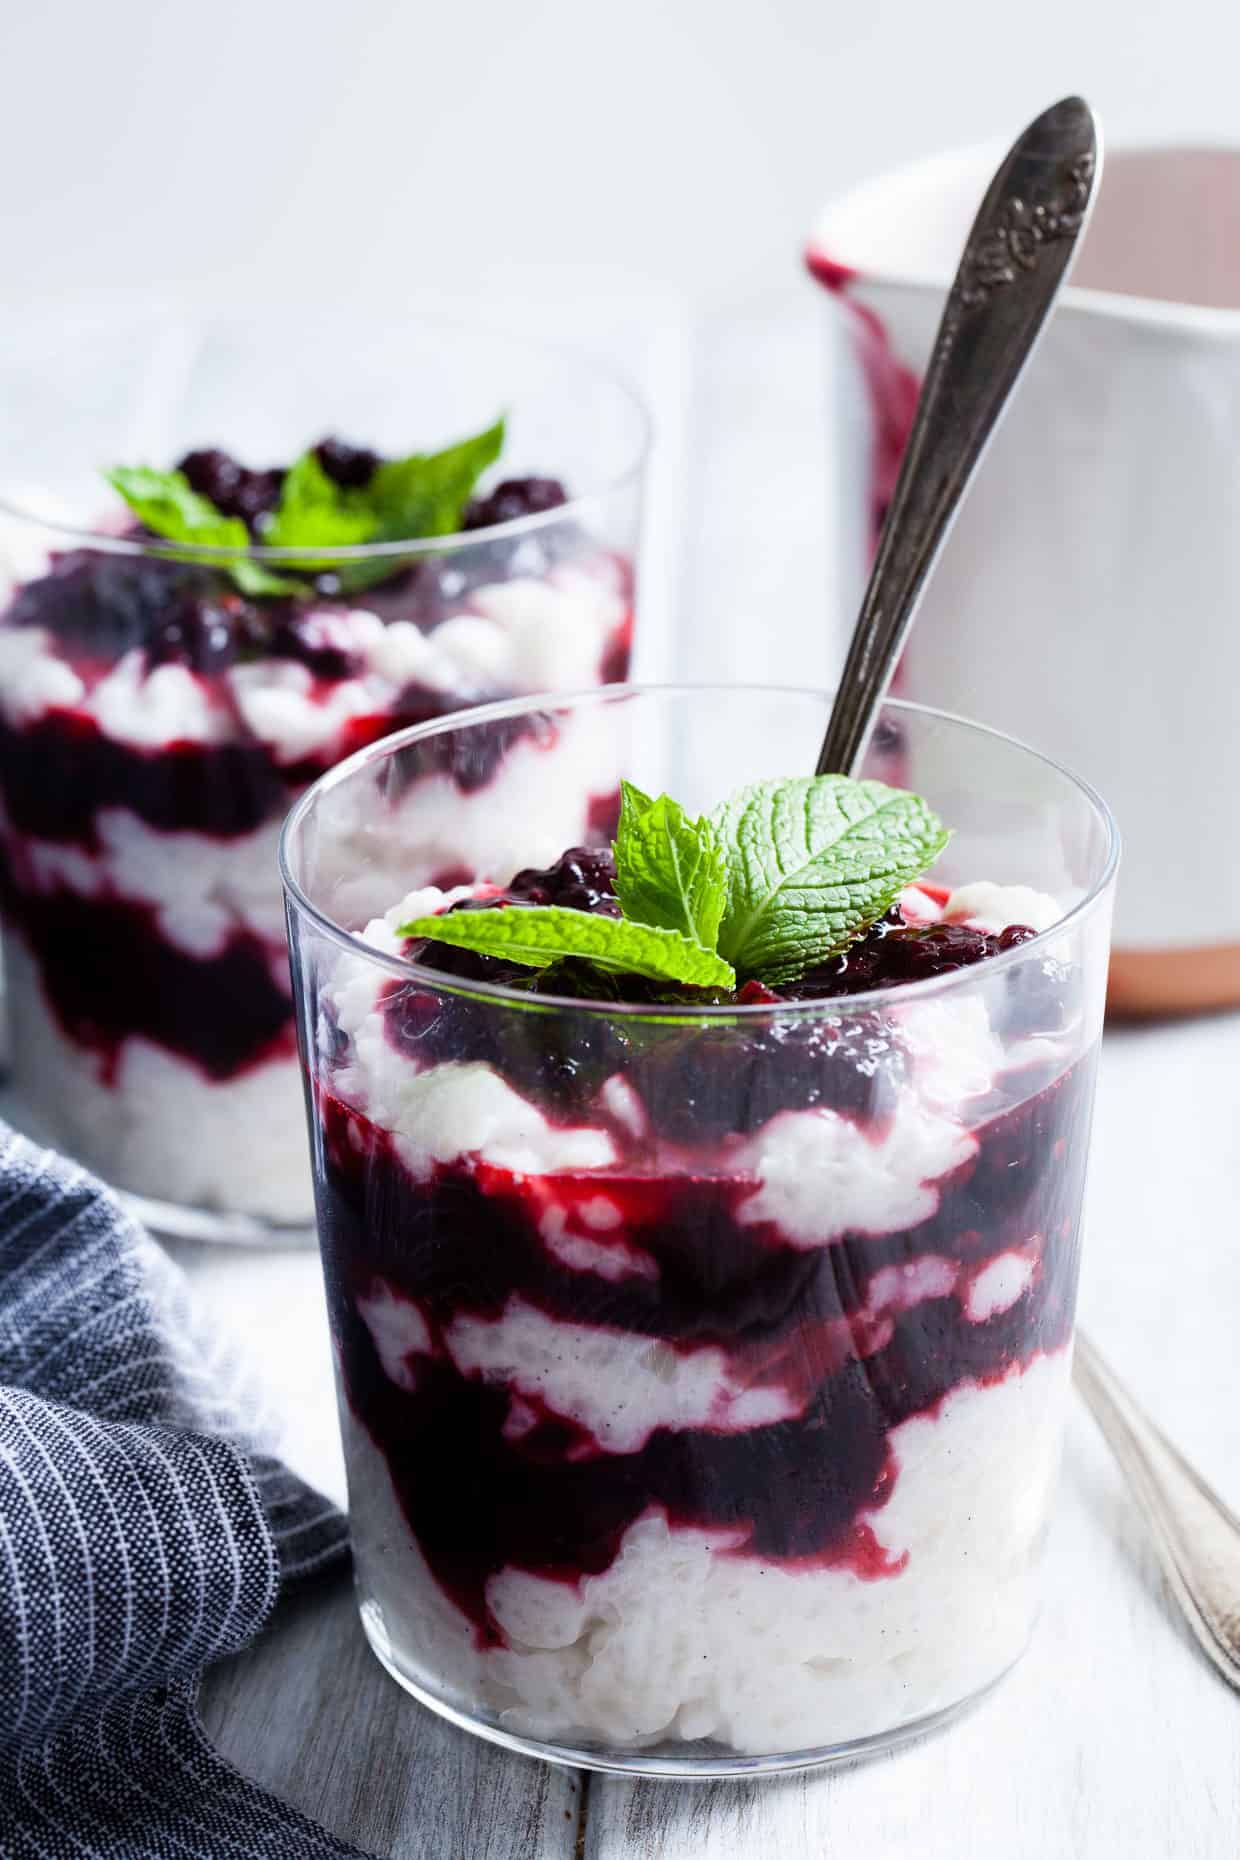 Coconut Rice Pudding with Mint Mulberry Compote